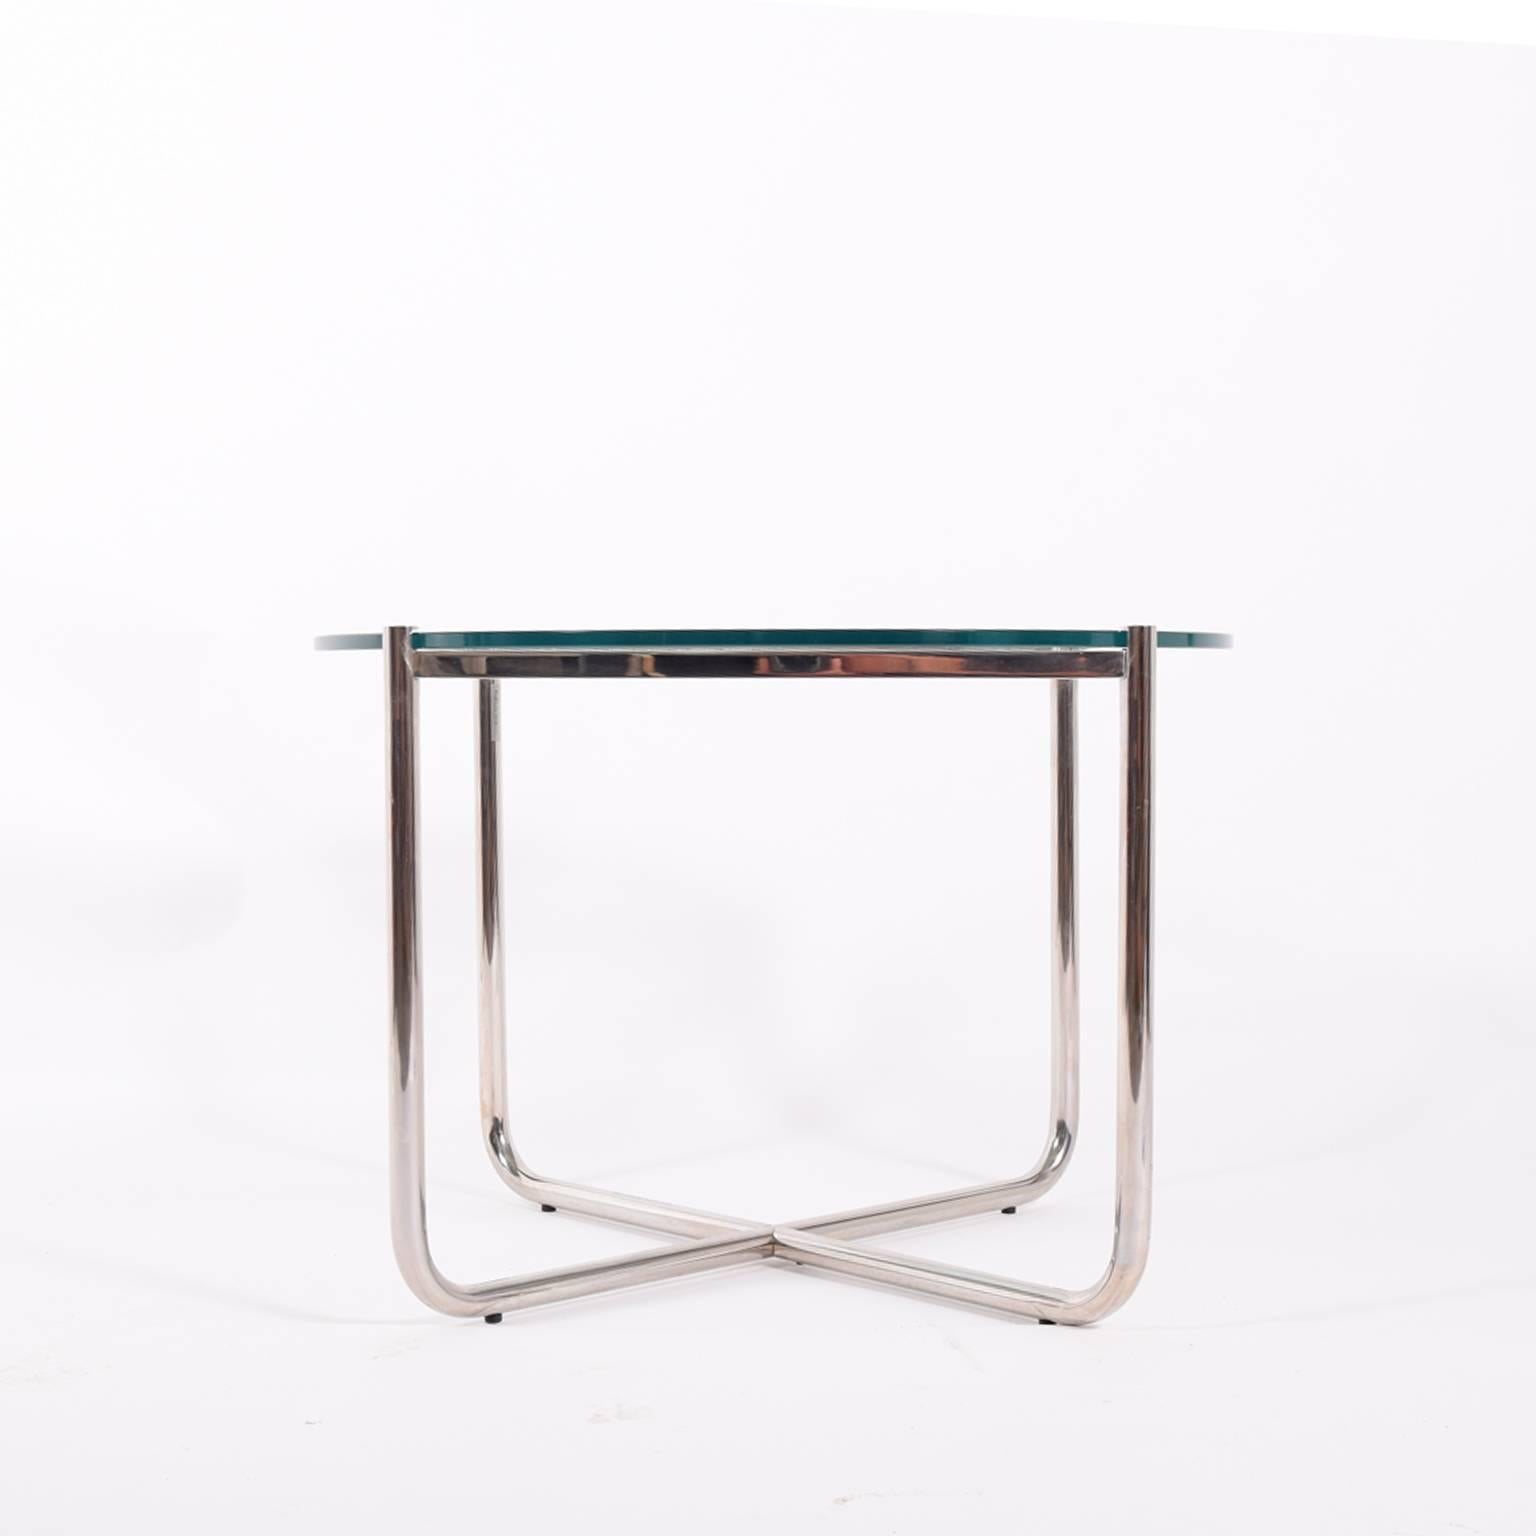 One of Mies' early designs from the 1920s with impressed Knoll logo to the chrome steel tubing.